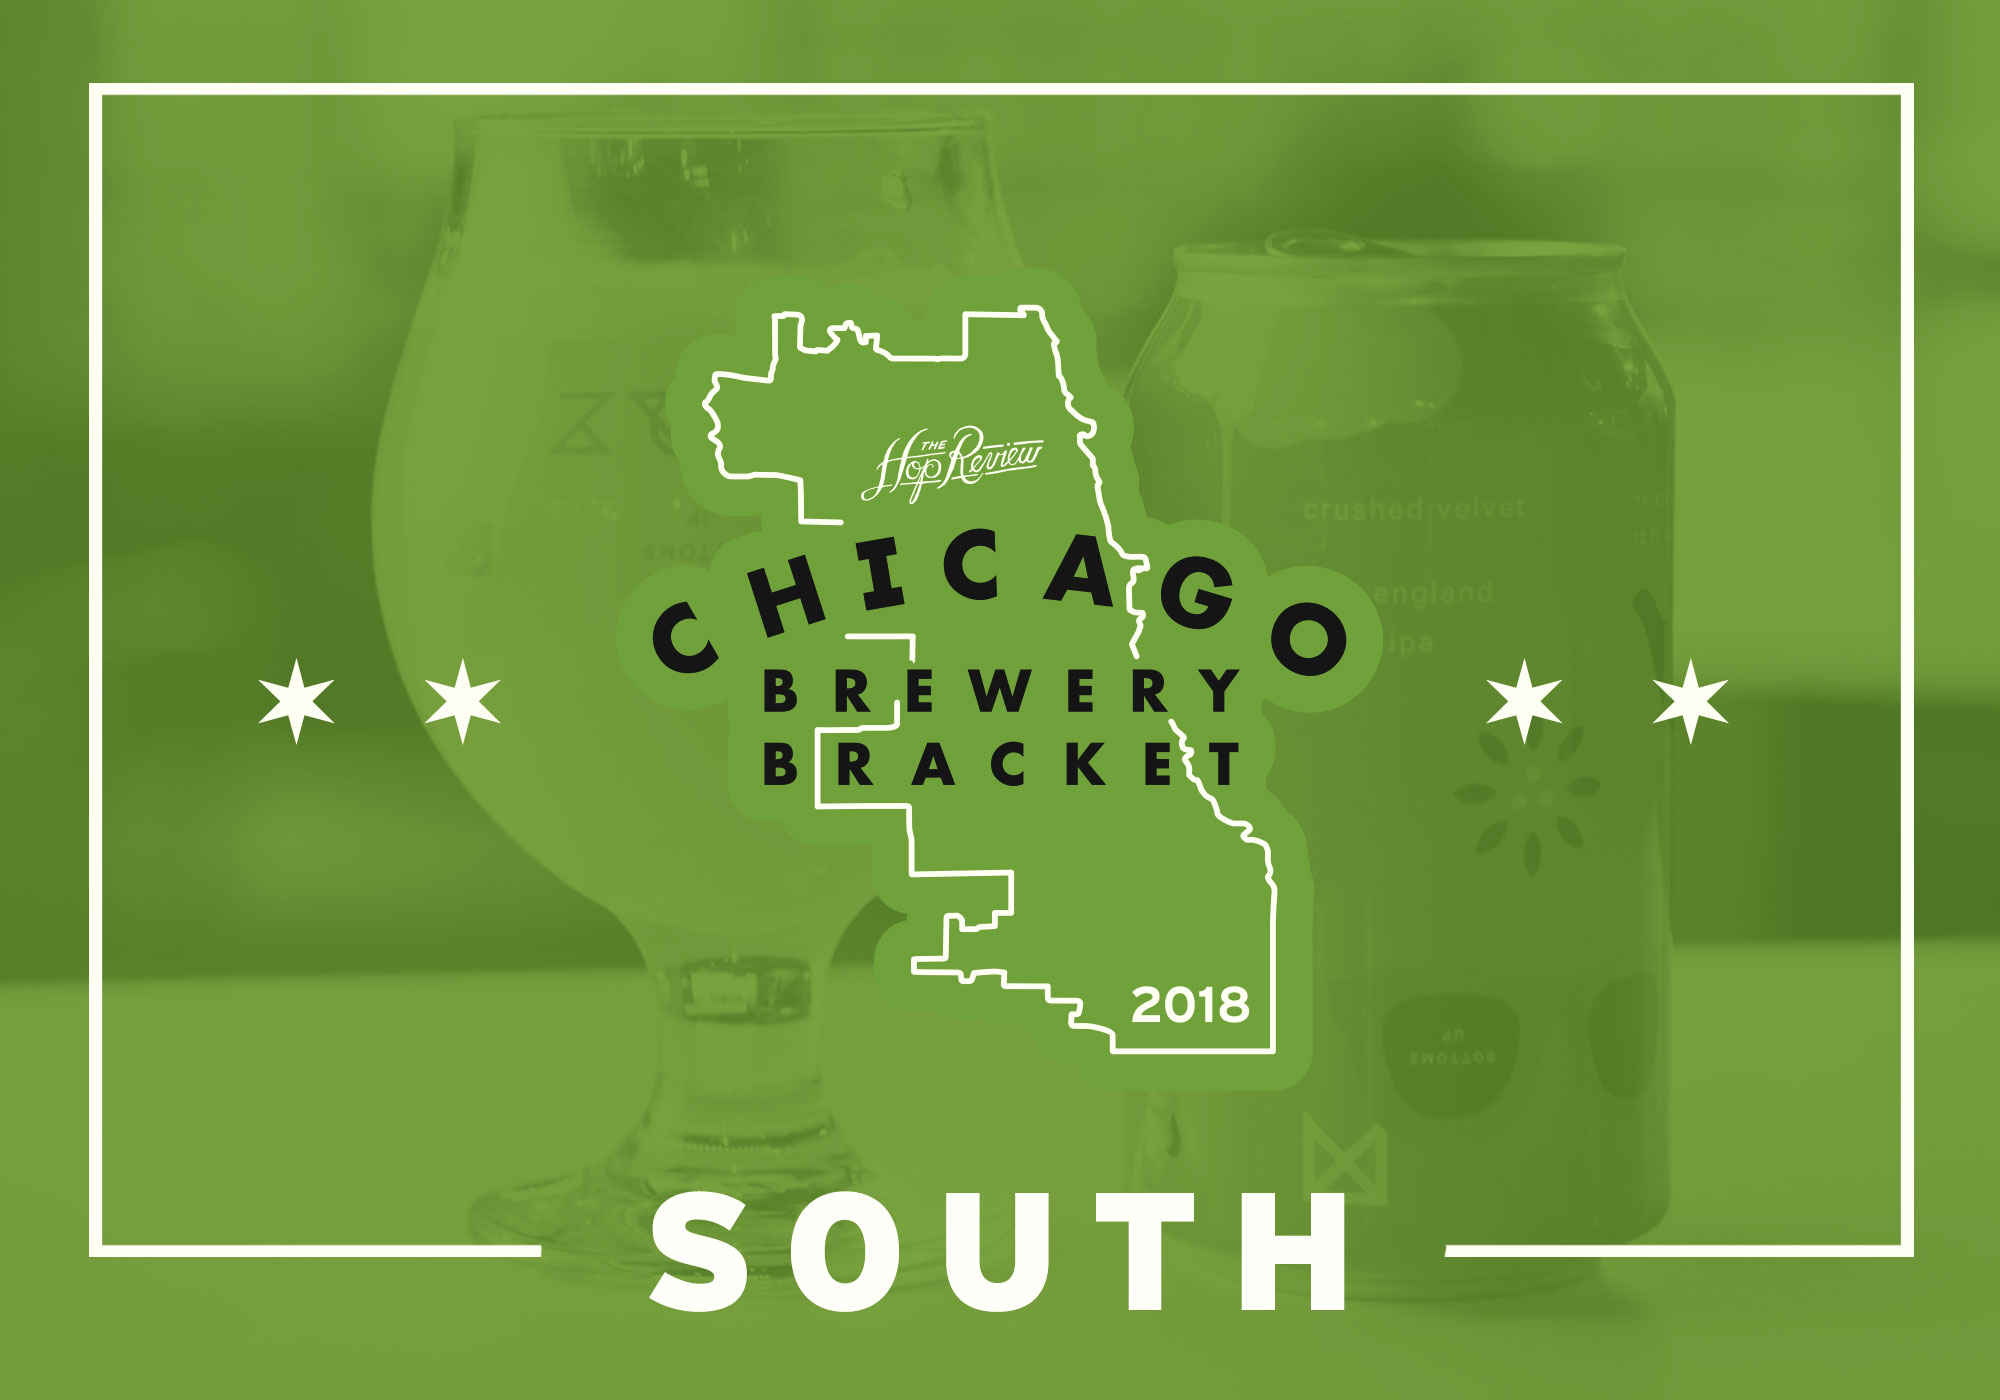 2018 Chicago Brewery Bracket: South – Rd. 2